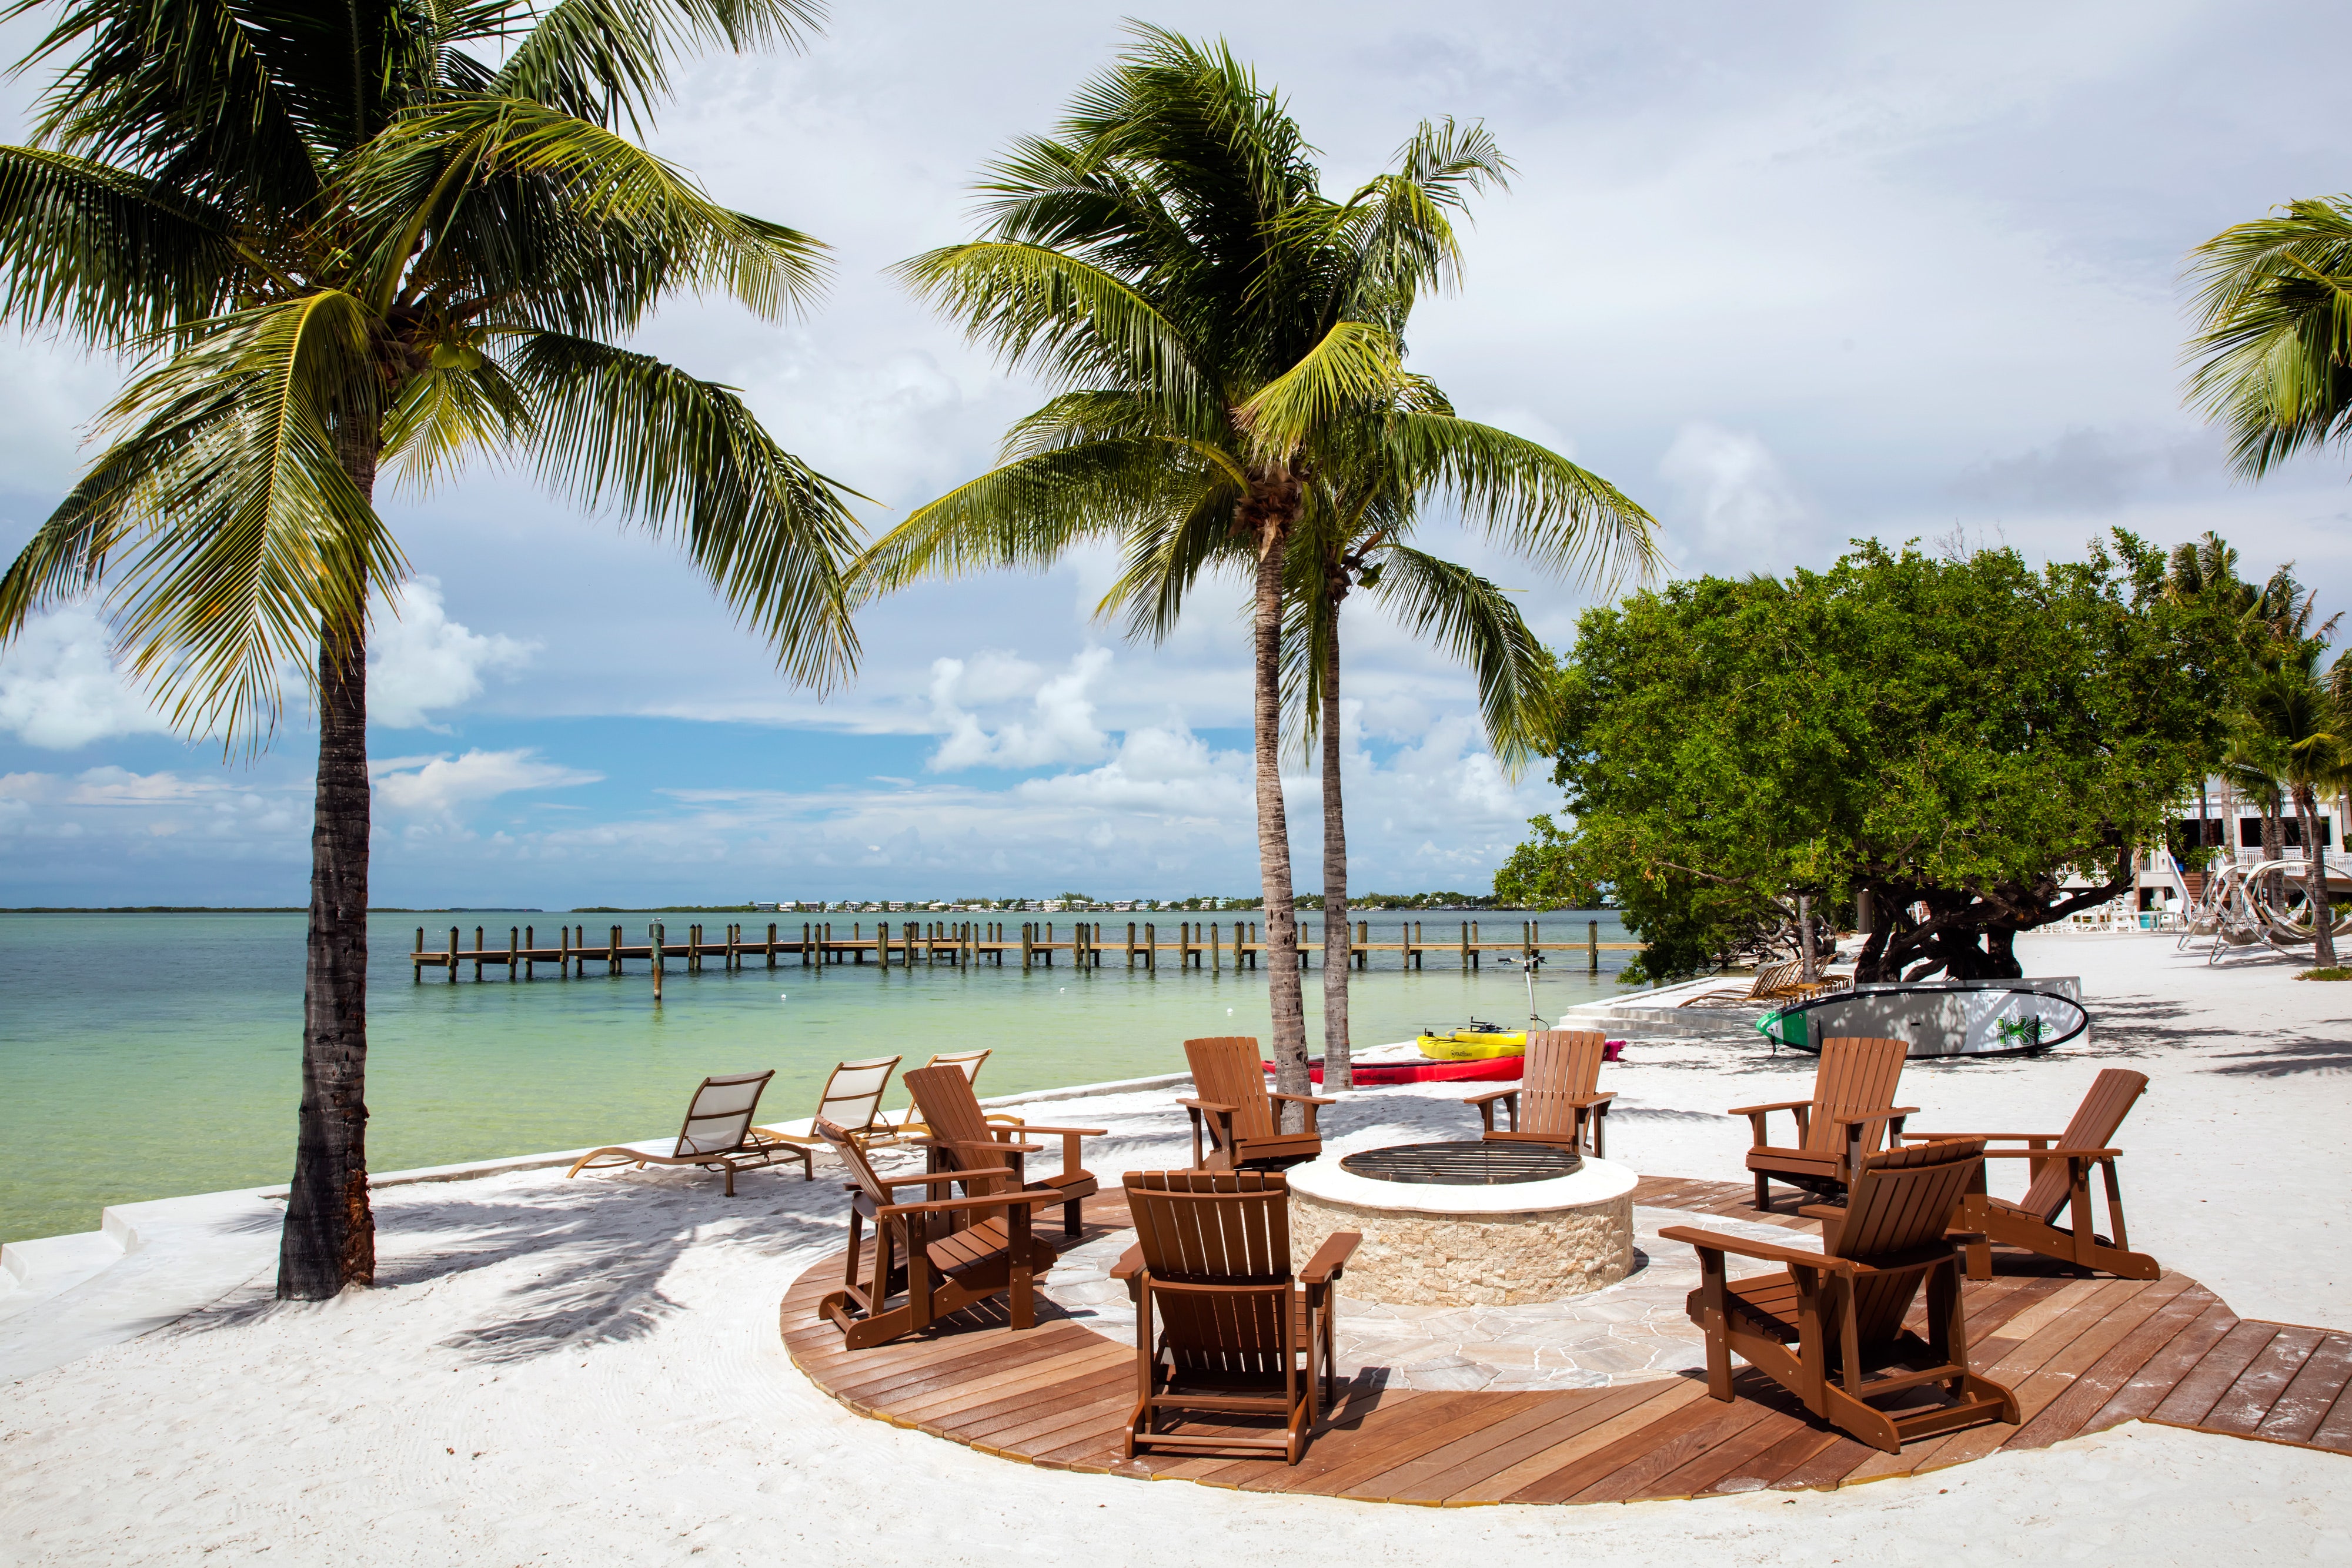 <p><strong>What was your first impression of this hotel? Why did it catch your attention?</strong><br> This waterfront oasis—part of Marriott's Autograph Collection—is a welcome sight after driving past one fast food outlet and tacky shop after the next on Overseas Highway in <a href="https://www.cntraveler.com/gallery/best-day-trips-from-key-west?mbid=synd_msn_rss">Key Largo</a>. The gleaming lobby feels more cosmopolitan than tropical.</p> <p><strong>What's the lowdown on the accommodations? What can we expect from our room?</strong><br> The rooms are stylish and contemporary with nary a seashell or palm leaf in sight. To some, this may feel out of place, but it's a nice departure from the typical decor in this part of the world.</p> <p><strong>Drinking and dining—what are we looking at?</strong><br> The resort has four bars and restaurants. Sol for a more casual meal, Las Olas for ceviche and sushi, the Sand Bar for a cocktail on the beach, and locally sourced La Marea, which has become a destination in its own right, for fine dining.</p> <p><strong>And how was the service while you were there?</strong> Staff are friendly, if not the most efficient.</p> <p><strong>What type of travelers will you find here?</strong><br> Marriott loyalists and vacationers looking for more modern comfort rather than over-the-top island vibes.</p> <p><strong>How does the hotel fit in with other spots in the area?</strong><br> It's a welcome and sophisticated alternative to much of what you'll find in Key Largo.</p> <p><strong>Is there anything we missed?</strong><br> Besides the rooms and suites, the resort has 10 bungalows and a beach house for groups and families looking for a little more space. You should also make sure to experience the spa during your stay.</p> <p><strong>Bottom line: Worth a stay?</strong><br> It is. The resort is an elegant spot, as good for couples as it is for families.</p>